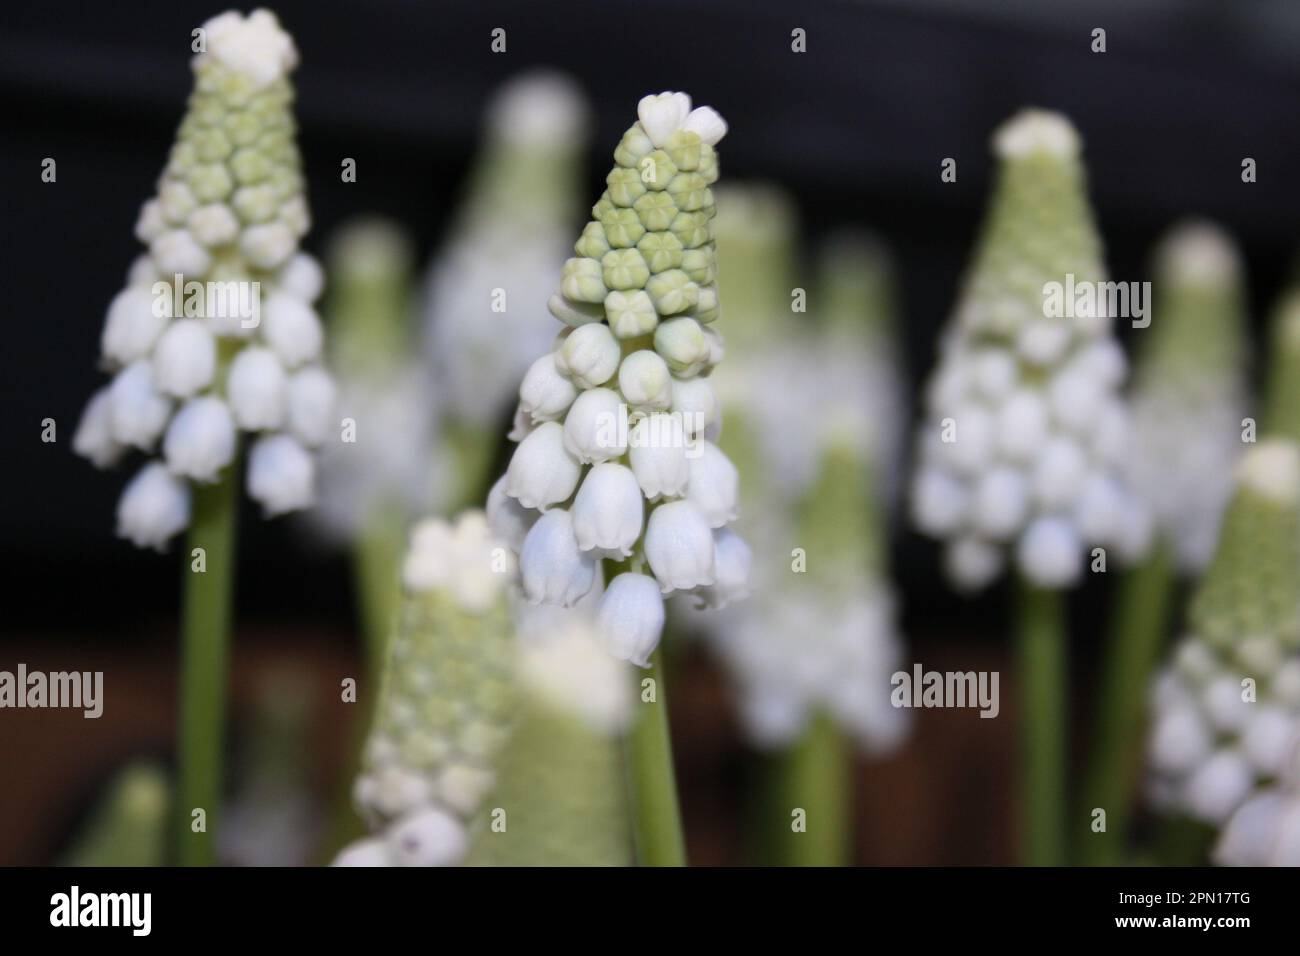 A close-up shot of a white Muscari aucheri blooming in lush, green grass, with another flower in the background Stock Photo